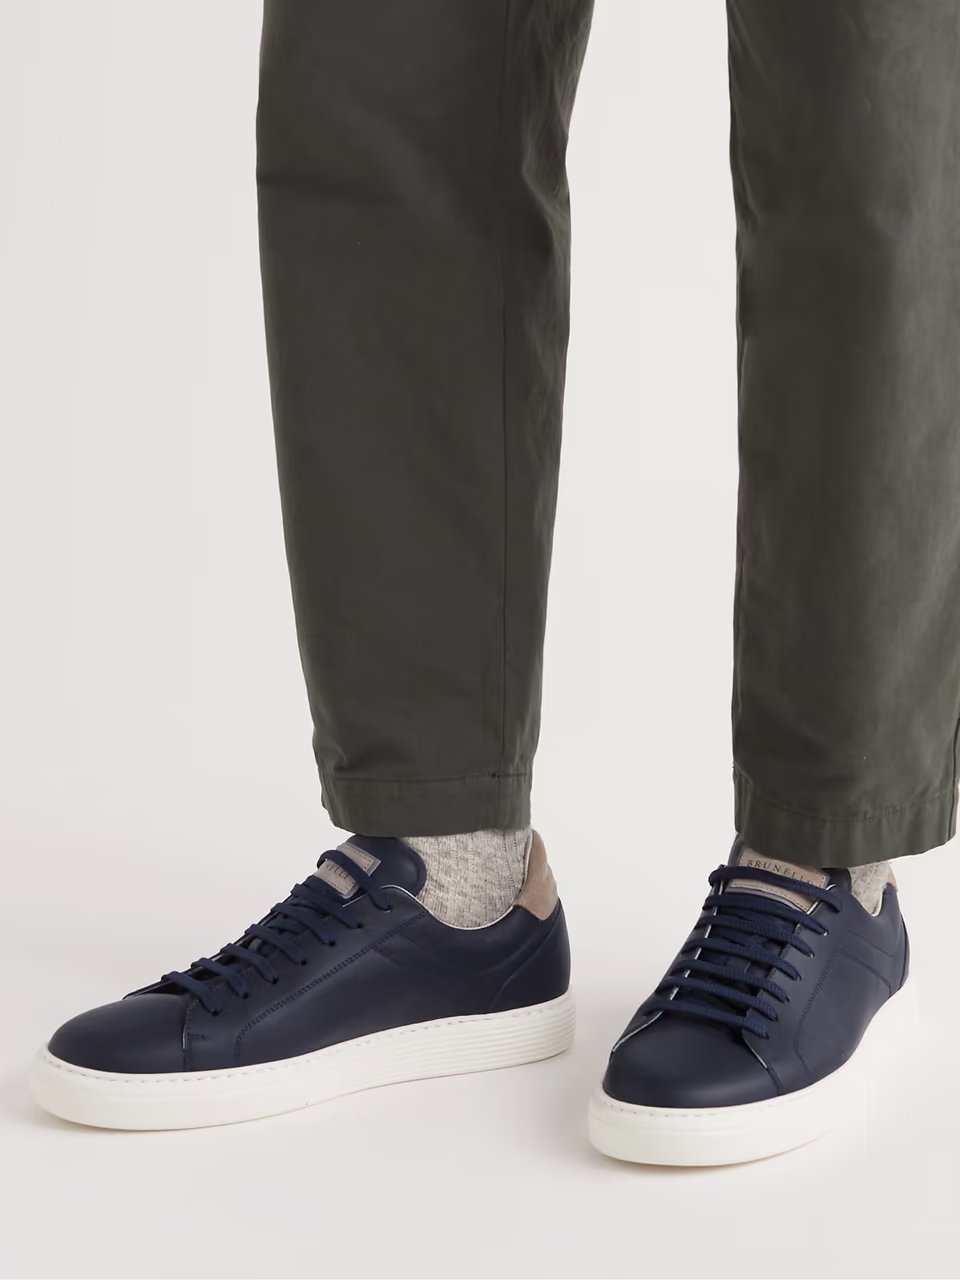 Brunello Cucinelli Suede-Trimmed Leather Sneakers - The best designer sneakers for men for this season